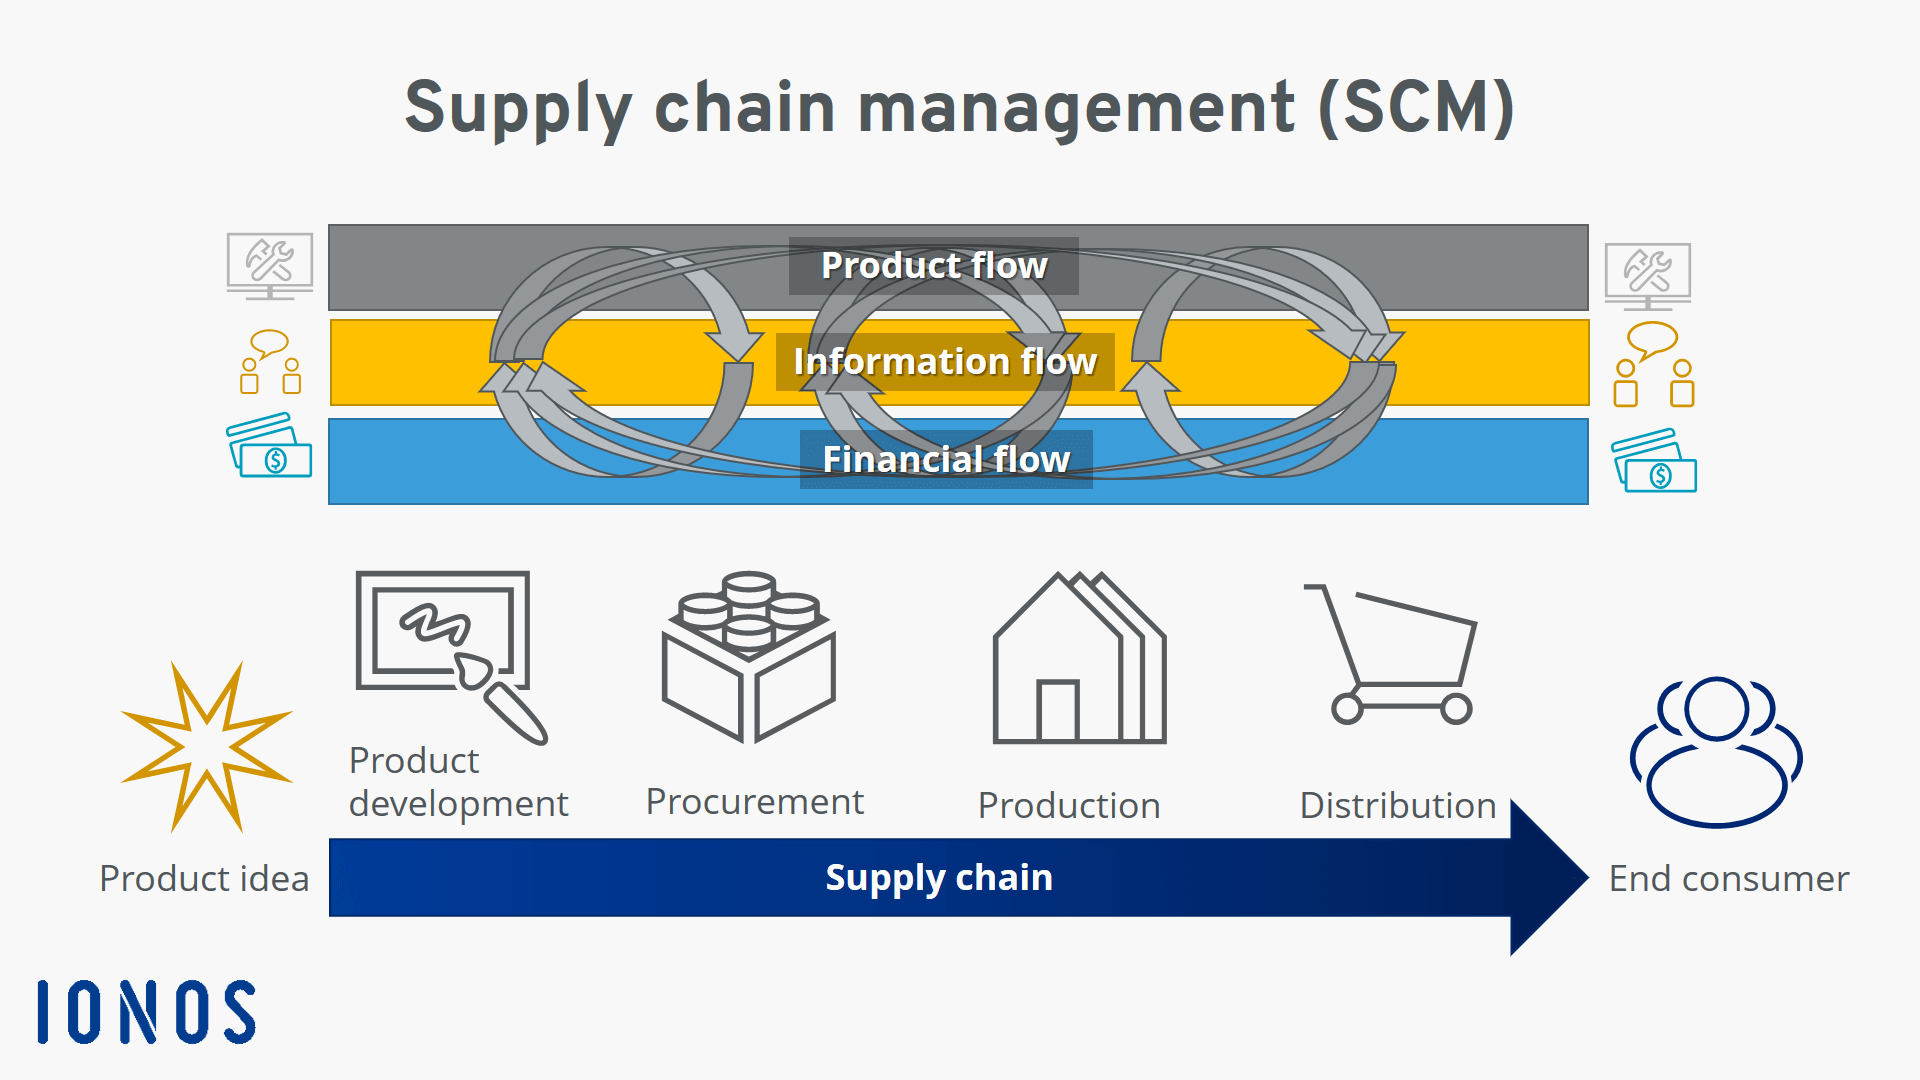 Supply chain management along the supply chain